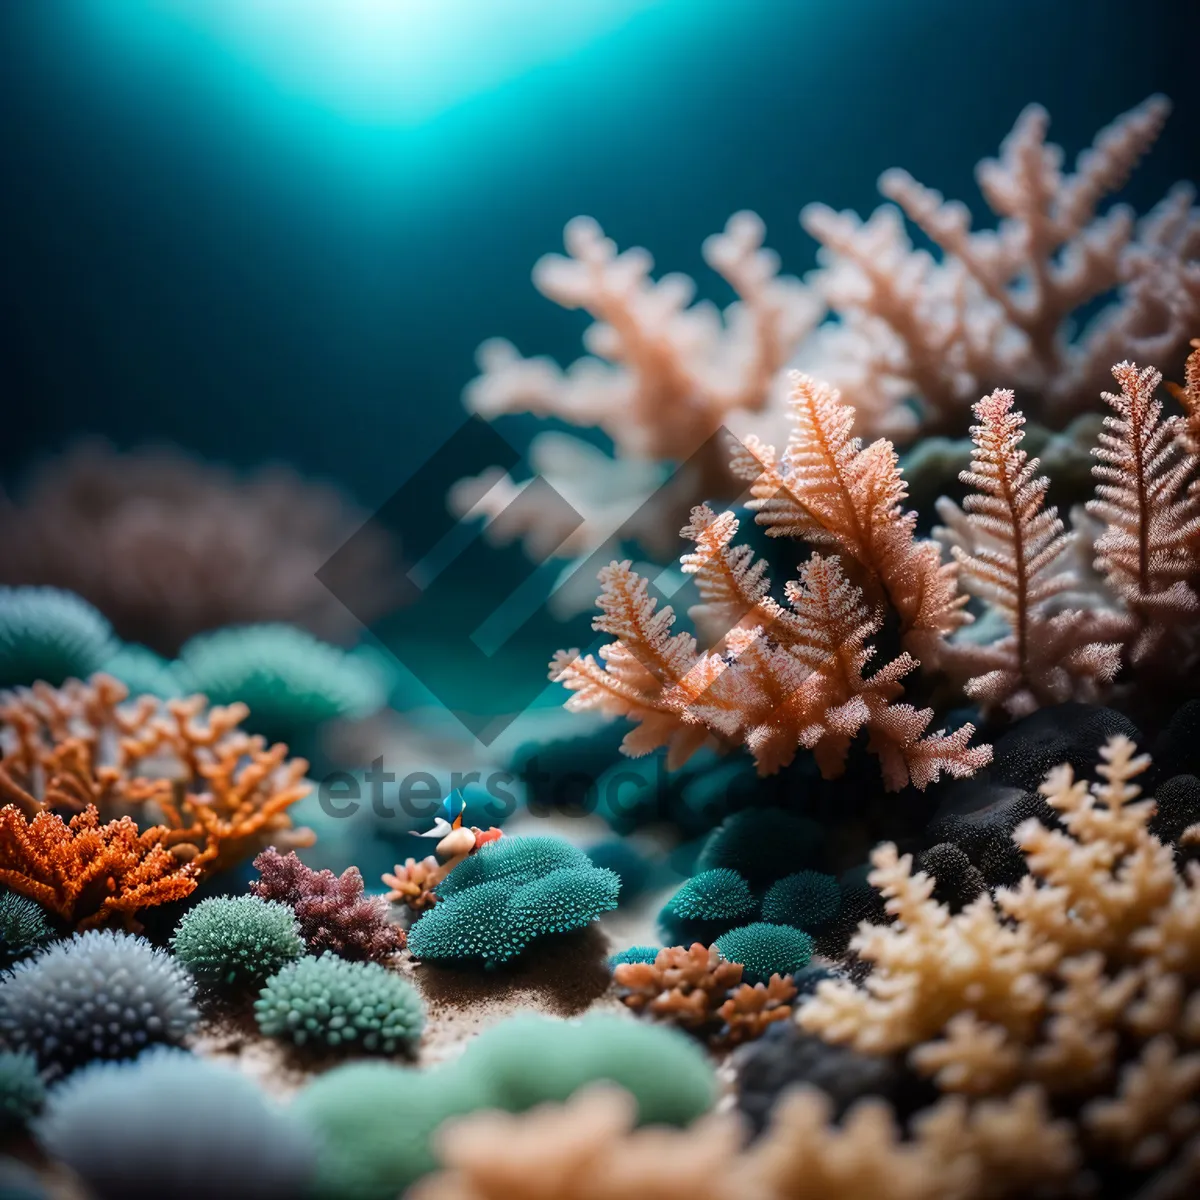 Picture of Colorful Sea Urchin Among Coral in Tropical Waters